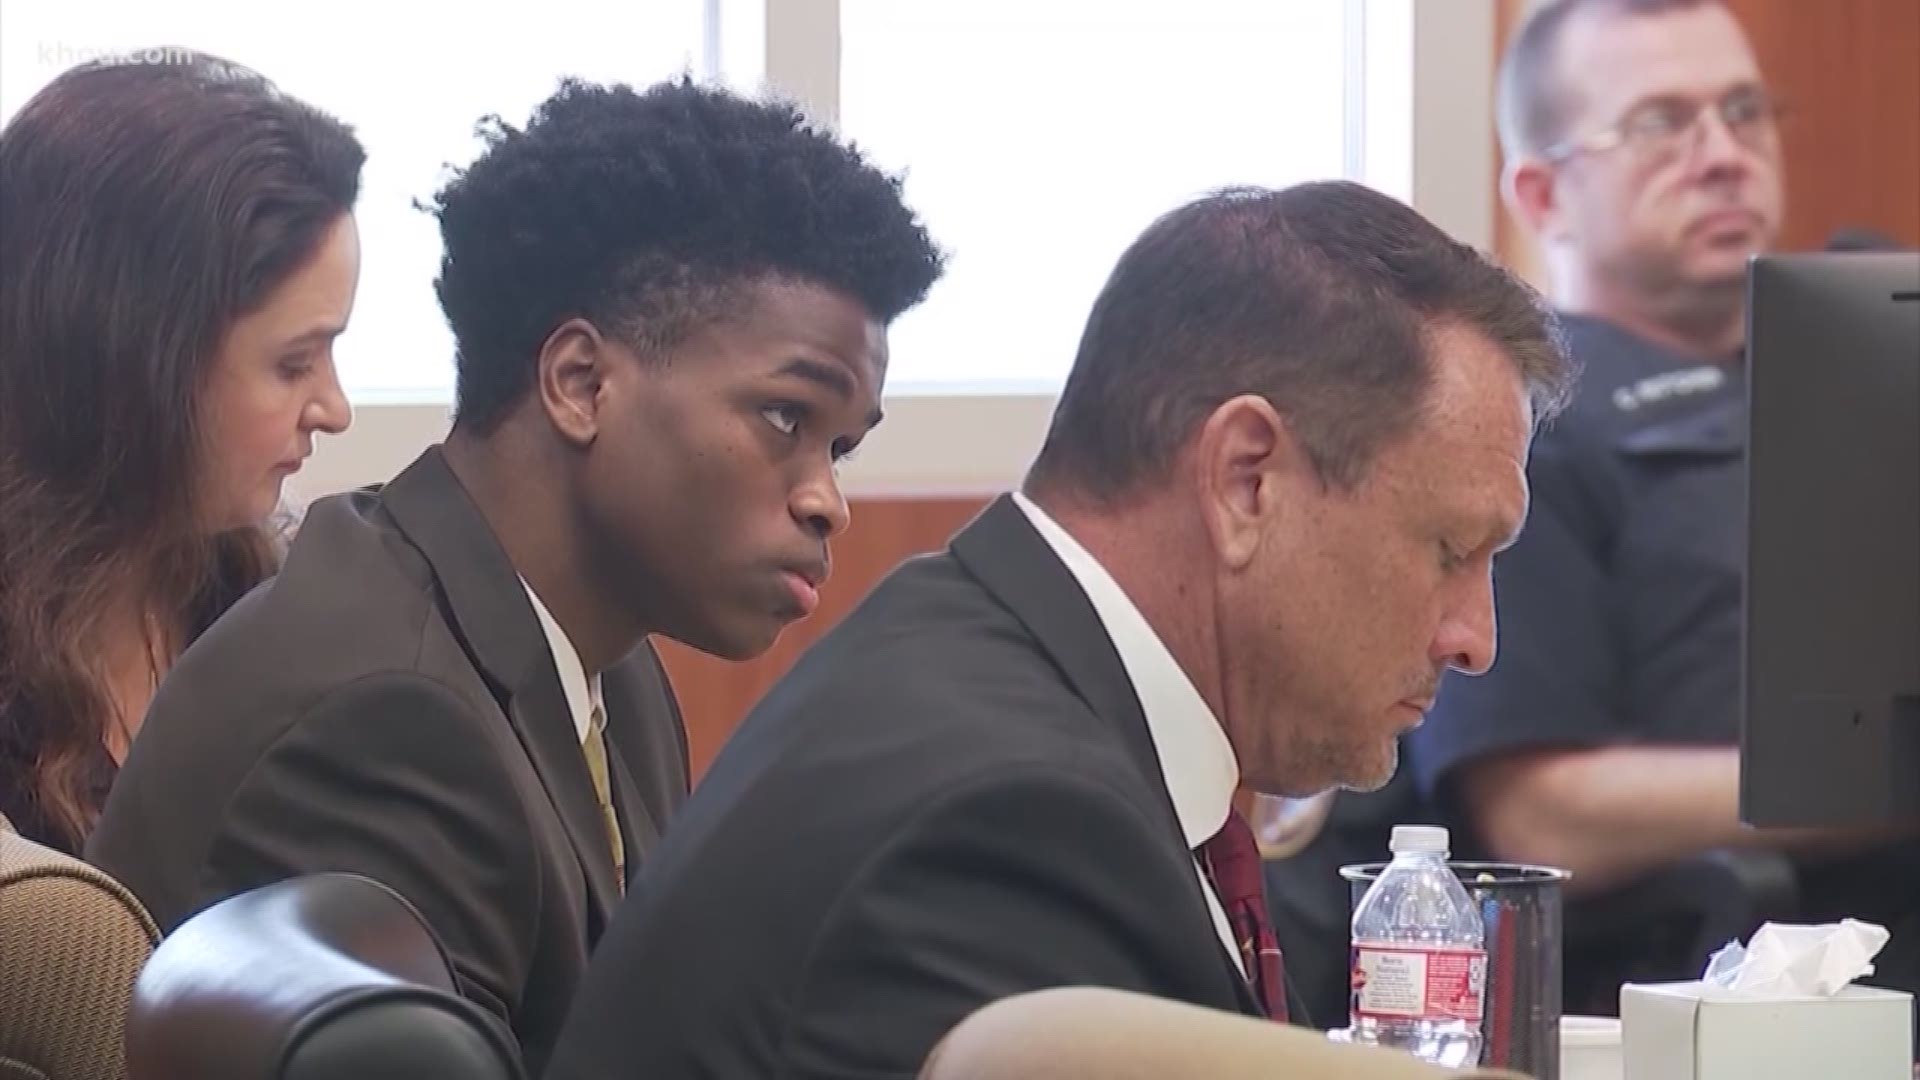 Jurors in the capital murder trial of Antonio Armstrong sent two notes to the judge Friday saying they were deadlocked. The judge told them to keep trying. Armstrong is on trial for the 2016 shooting deaths of his parents.